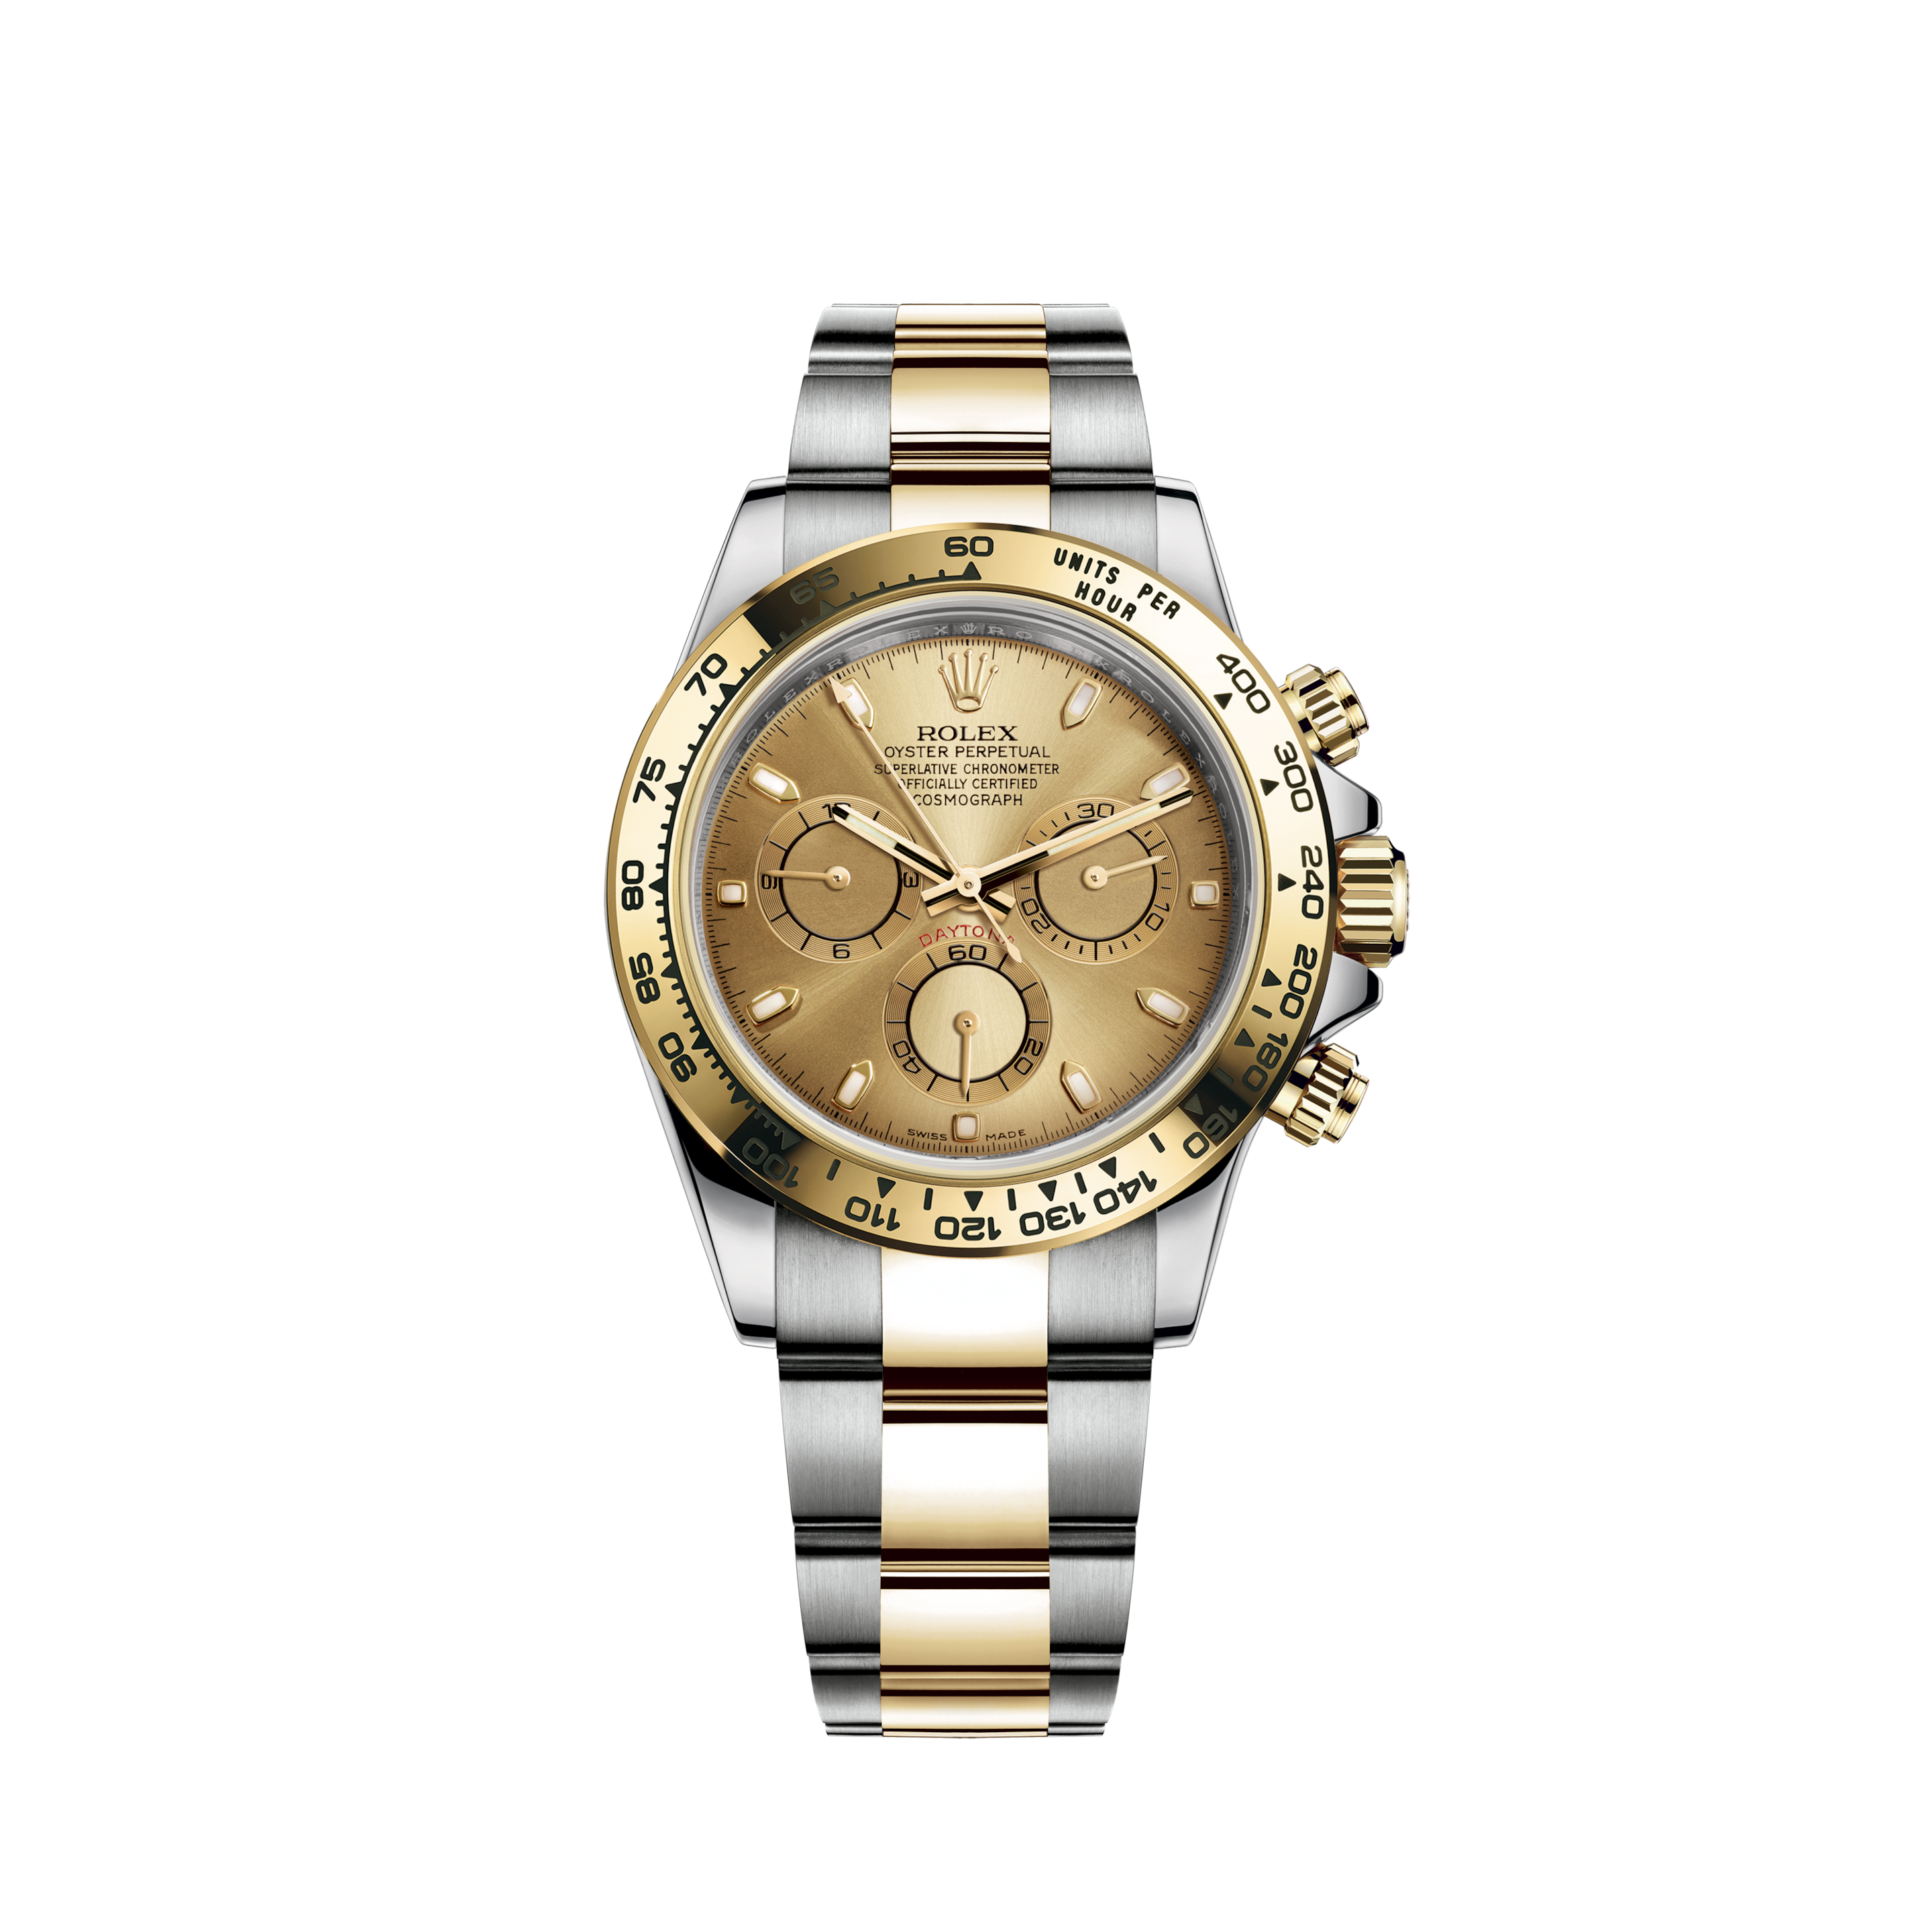 Rolex Explorer, Reference 1016 | A Stainless Steel Wristwatch With 